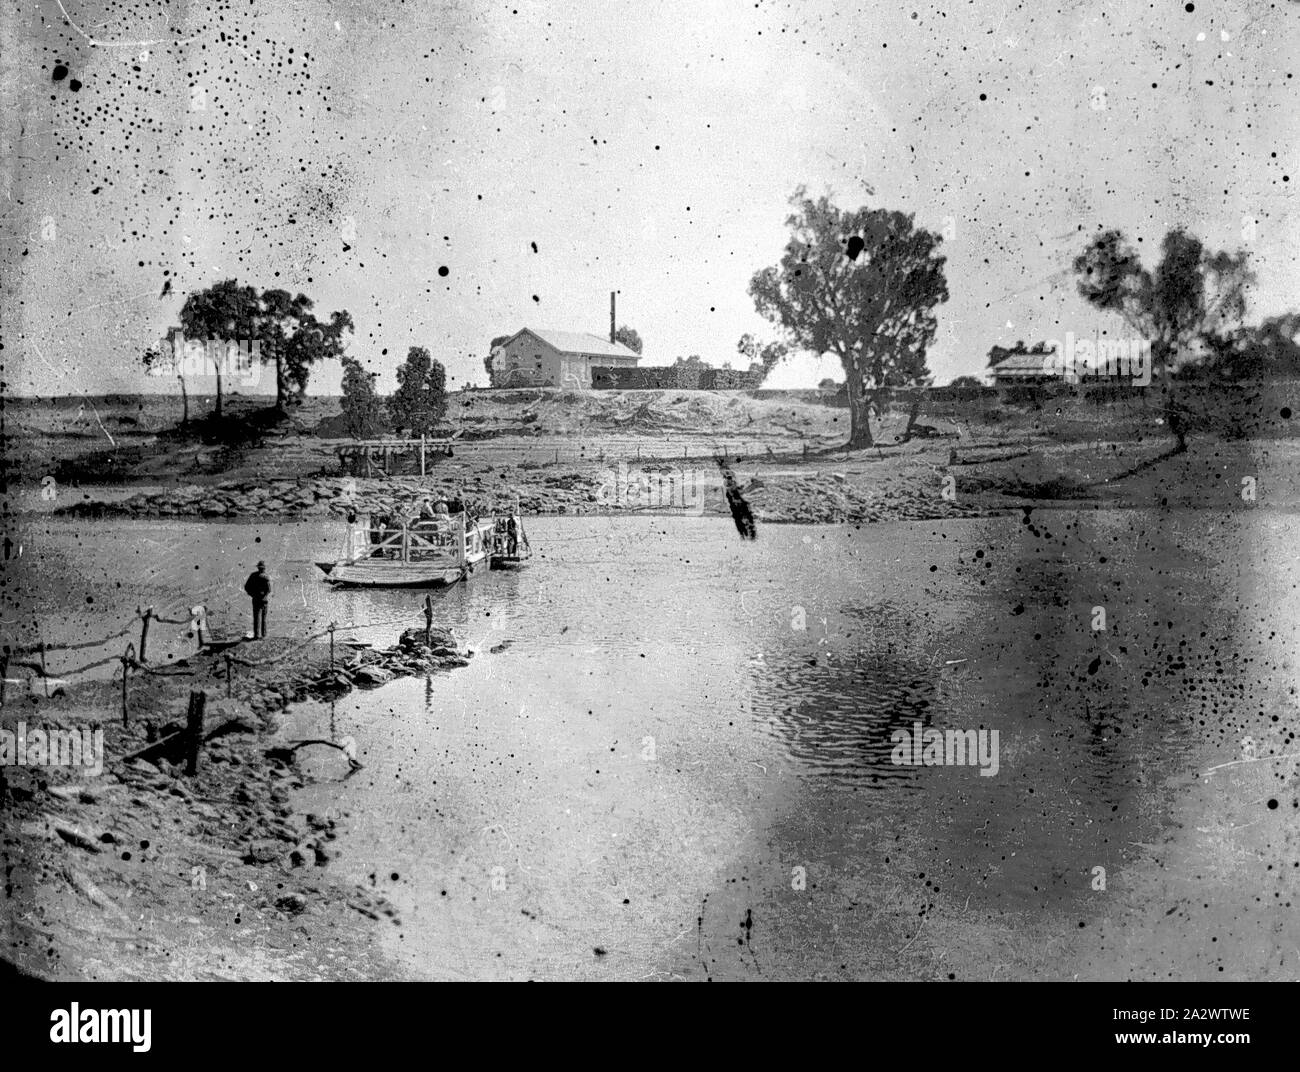 Negative - Psyche, Victoria, circa 1905, A punt crossing the Murray River. The river appears to be extremely low Stock Photo